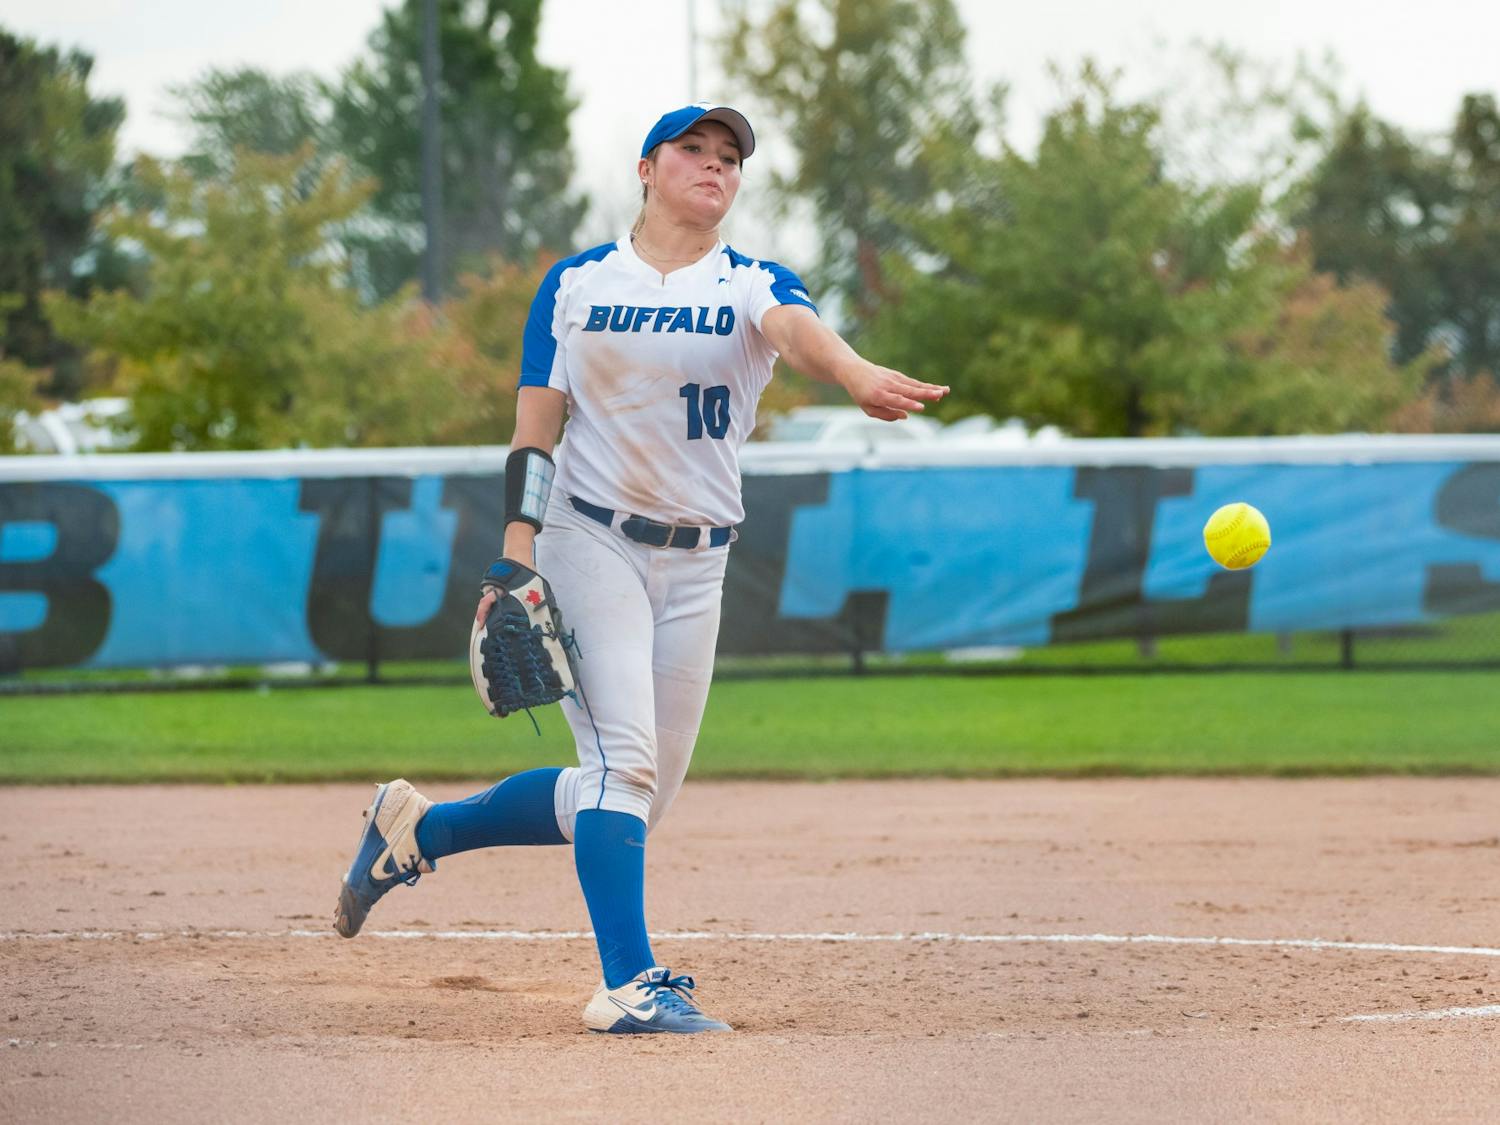 Senior pitcher Alexis Lucyshyn was one of two players to record a hit in UB’s 9-0 loss to Jax State Friday.&nbsp;